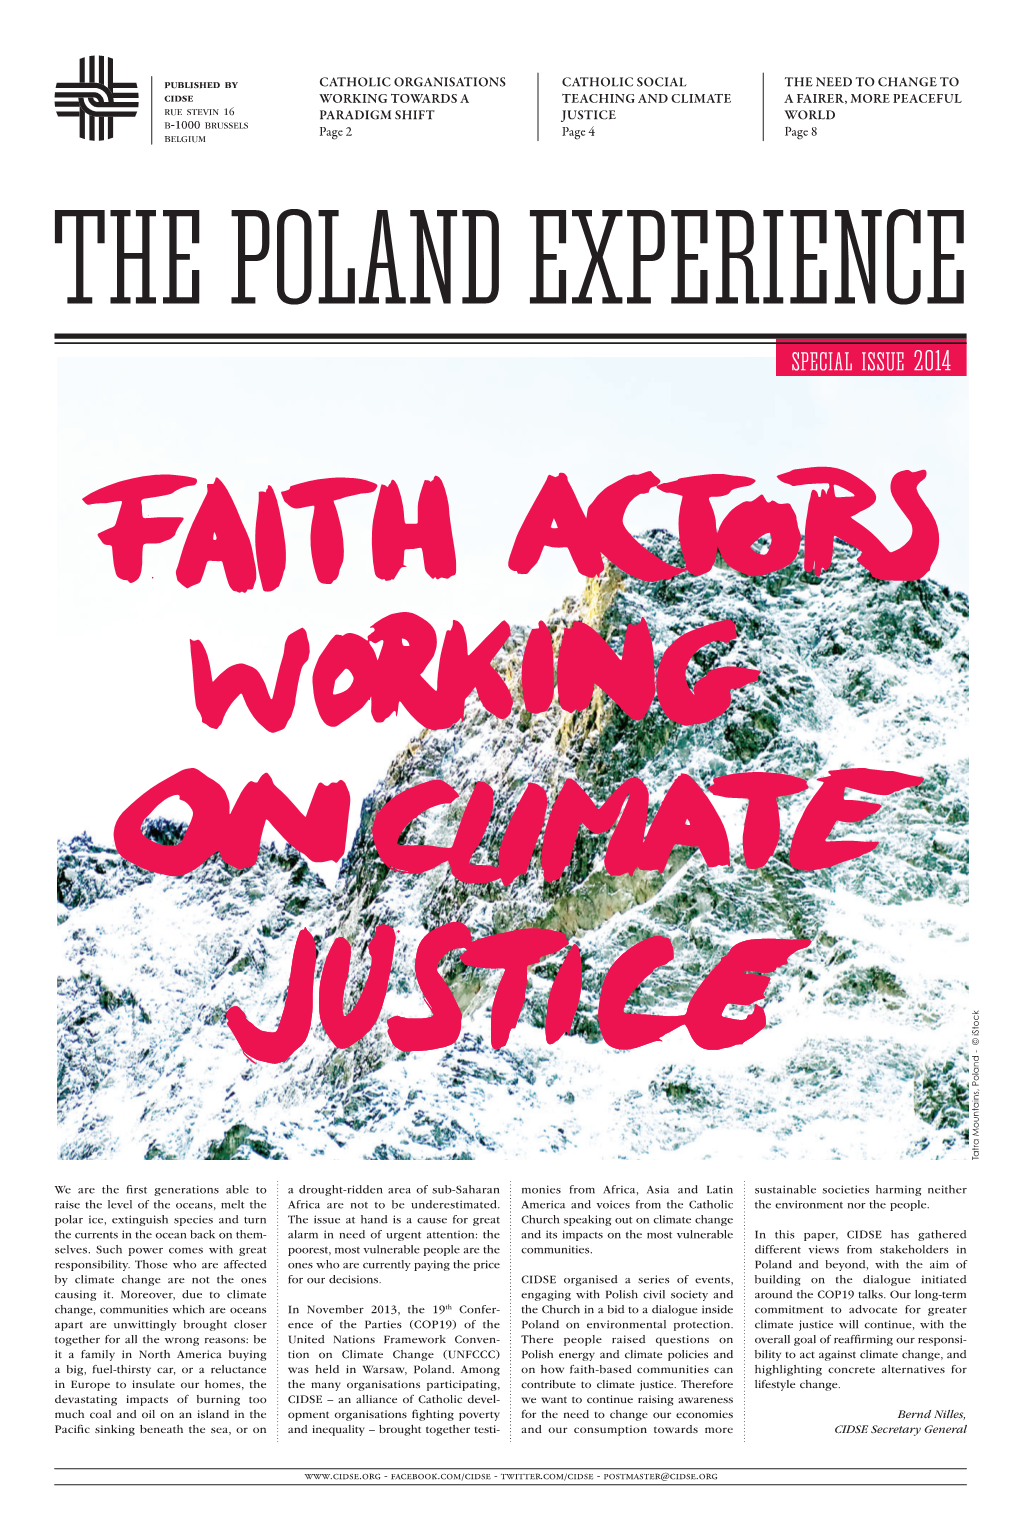 Catholic Social Teaching and Climate Justice